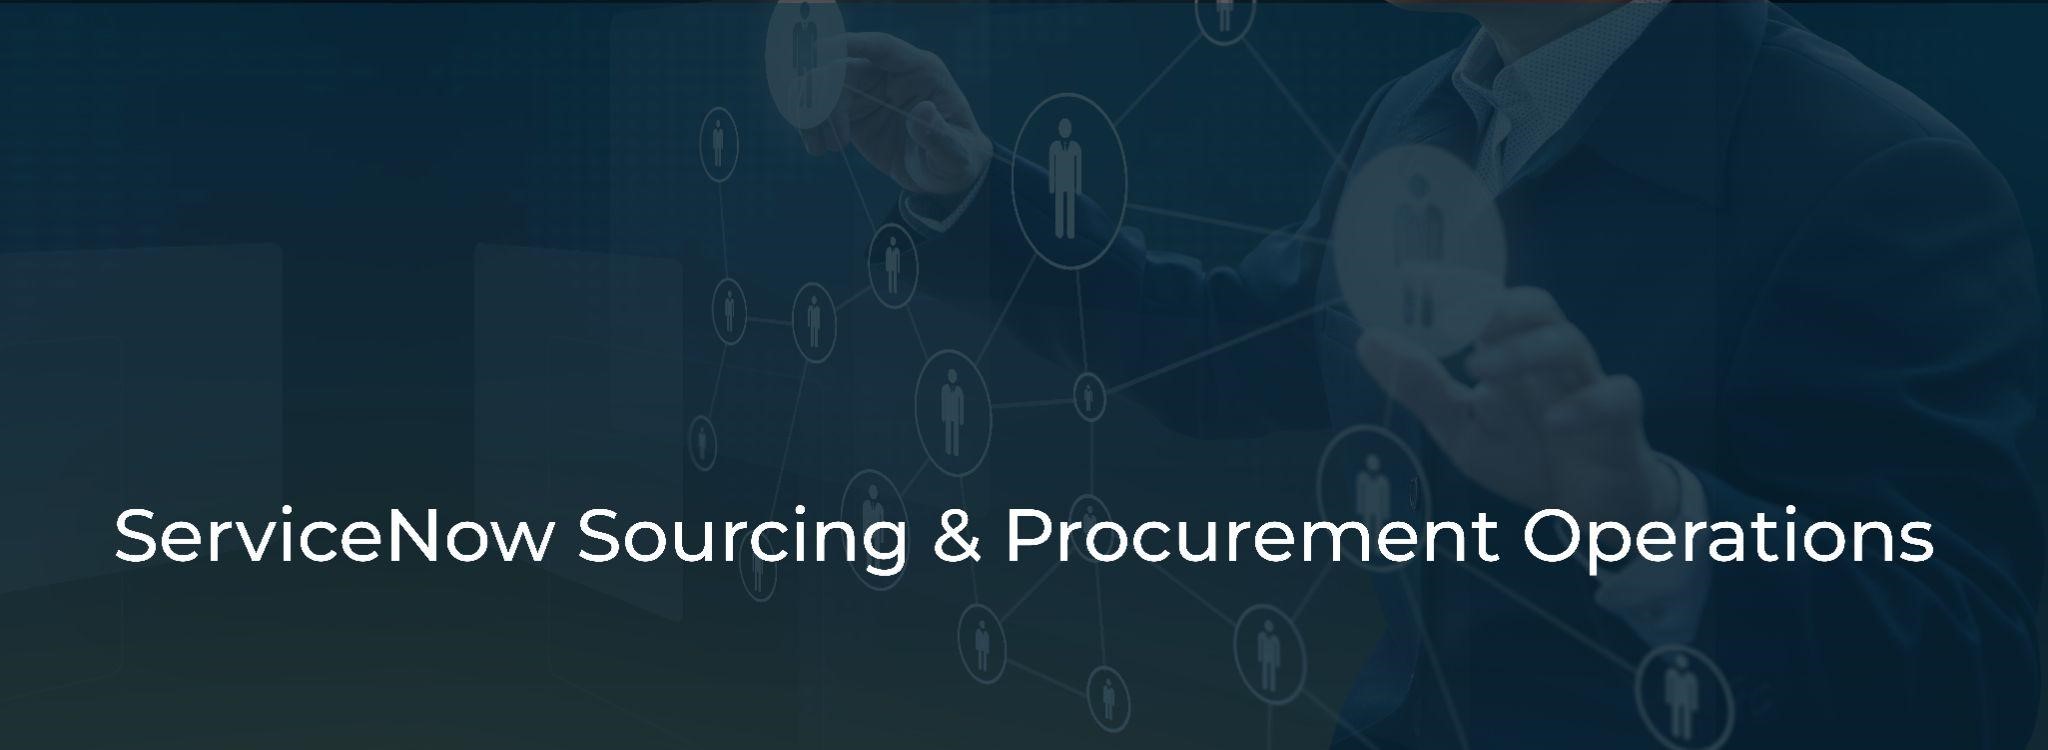 ServiceNow Sourcing and Procurement Operations